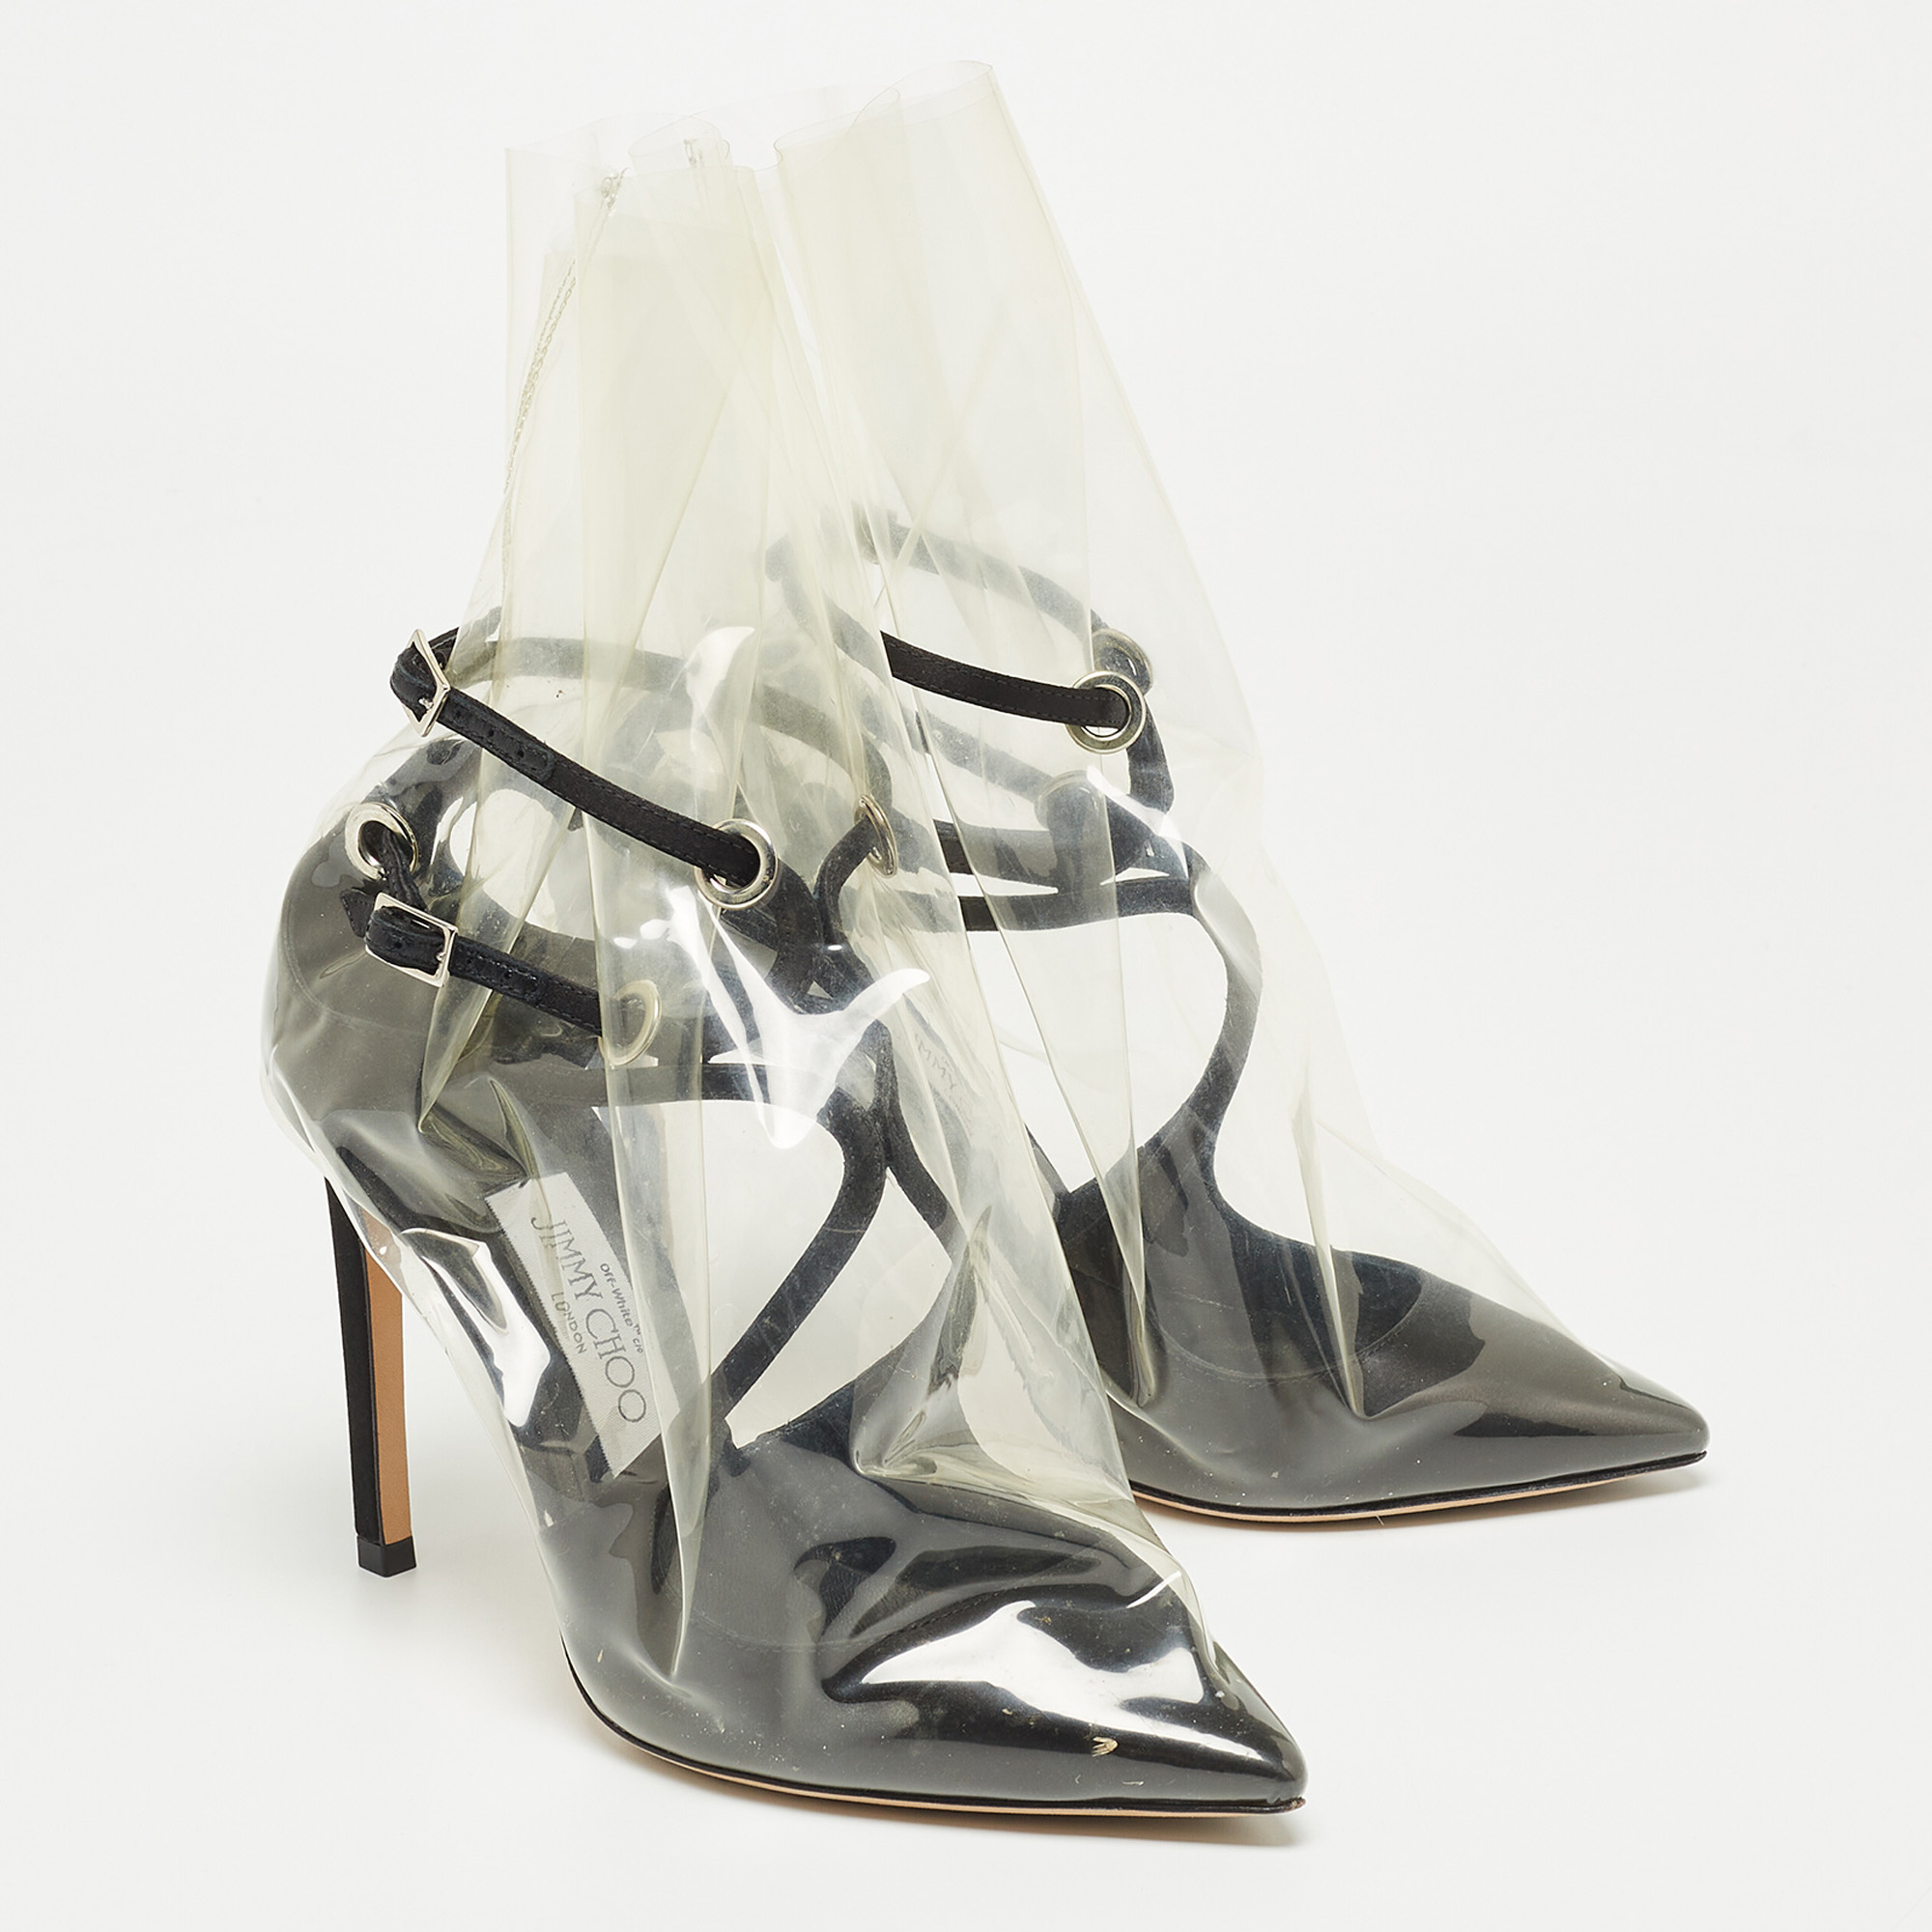 Jimmy Choo X Off-White Black/Transparent Satin And PVC Pointed Toe Ankle Boots Size 36